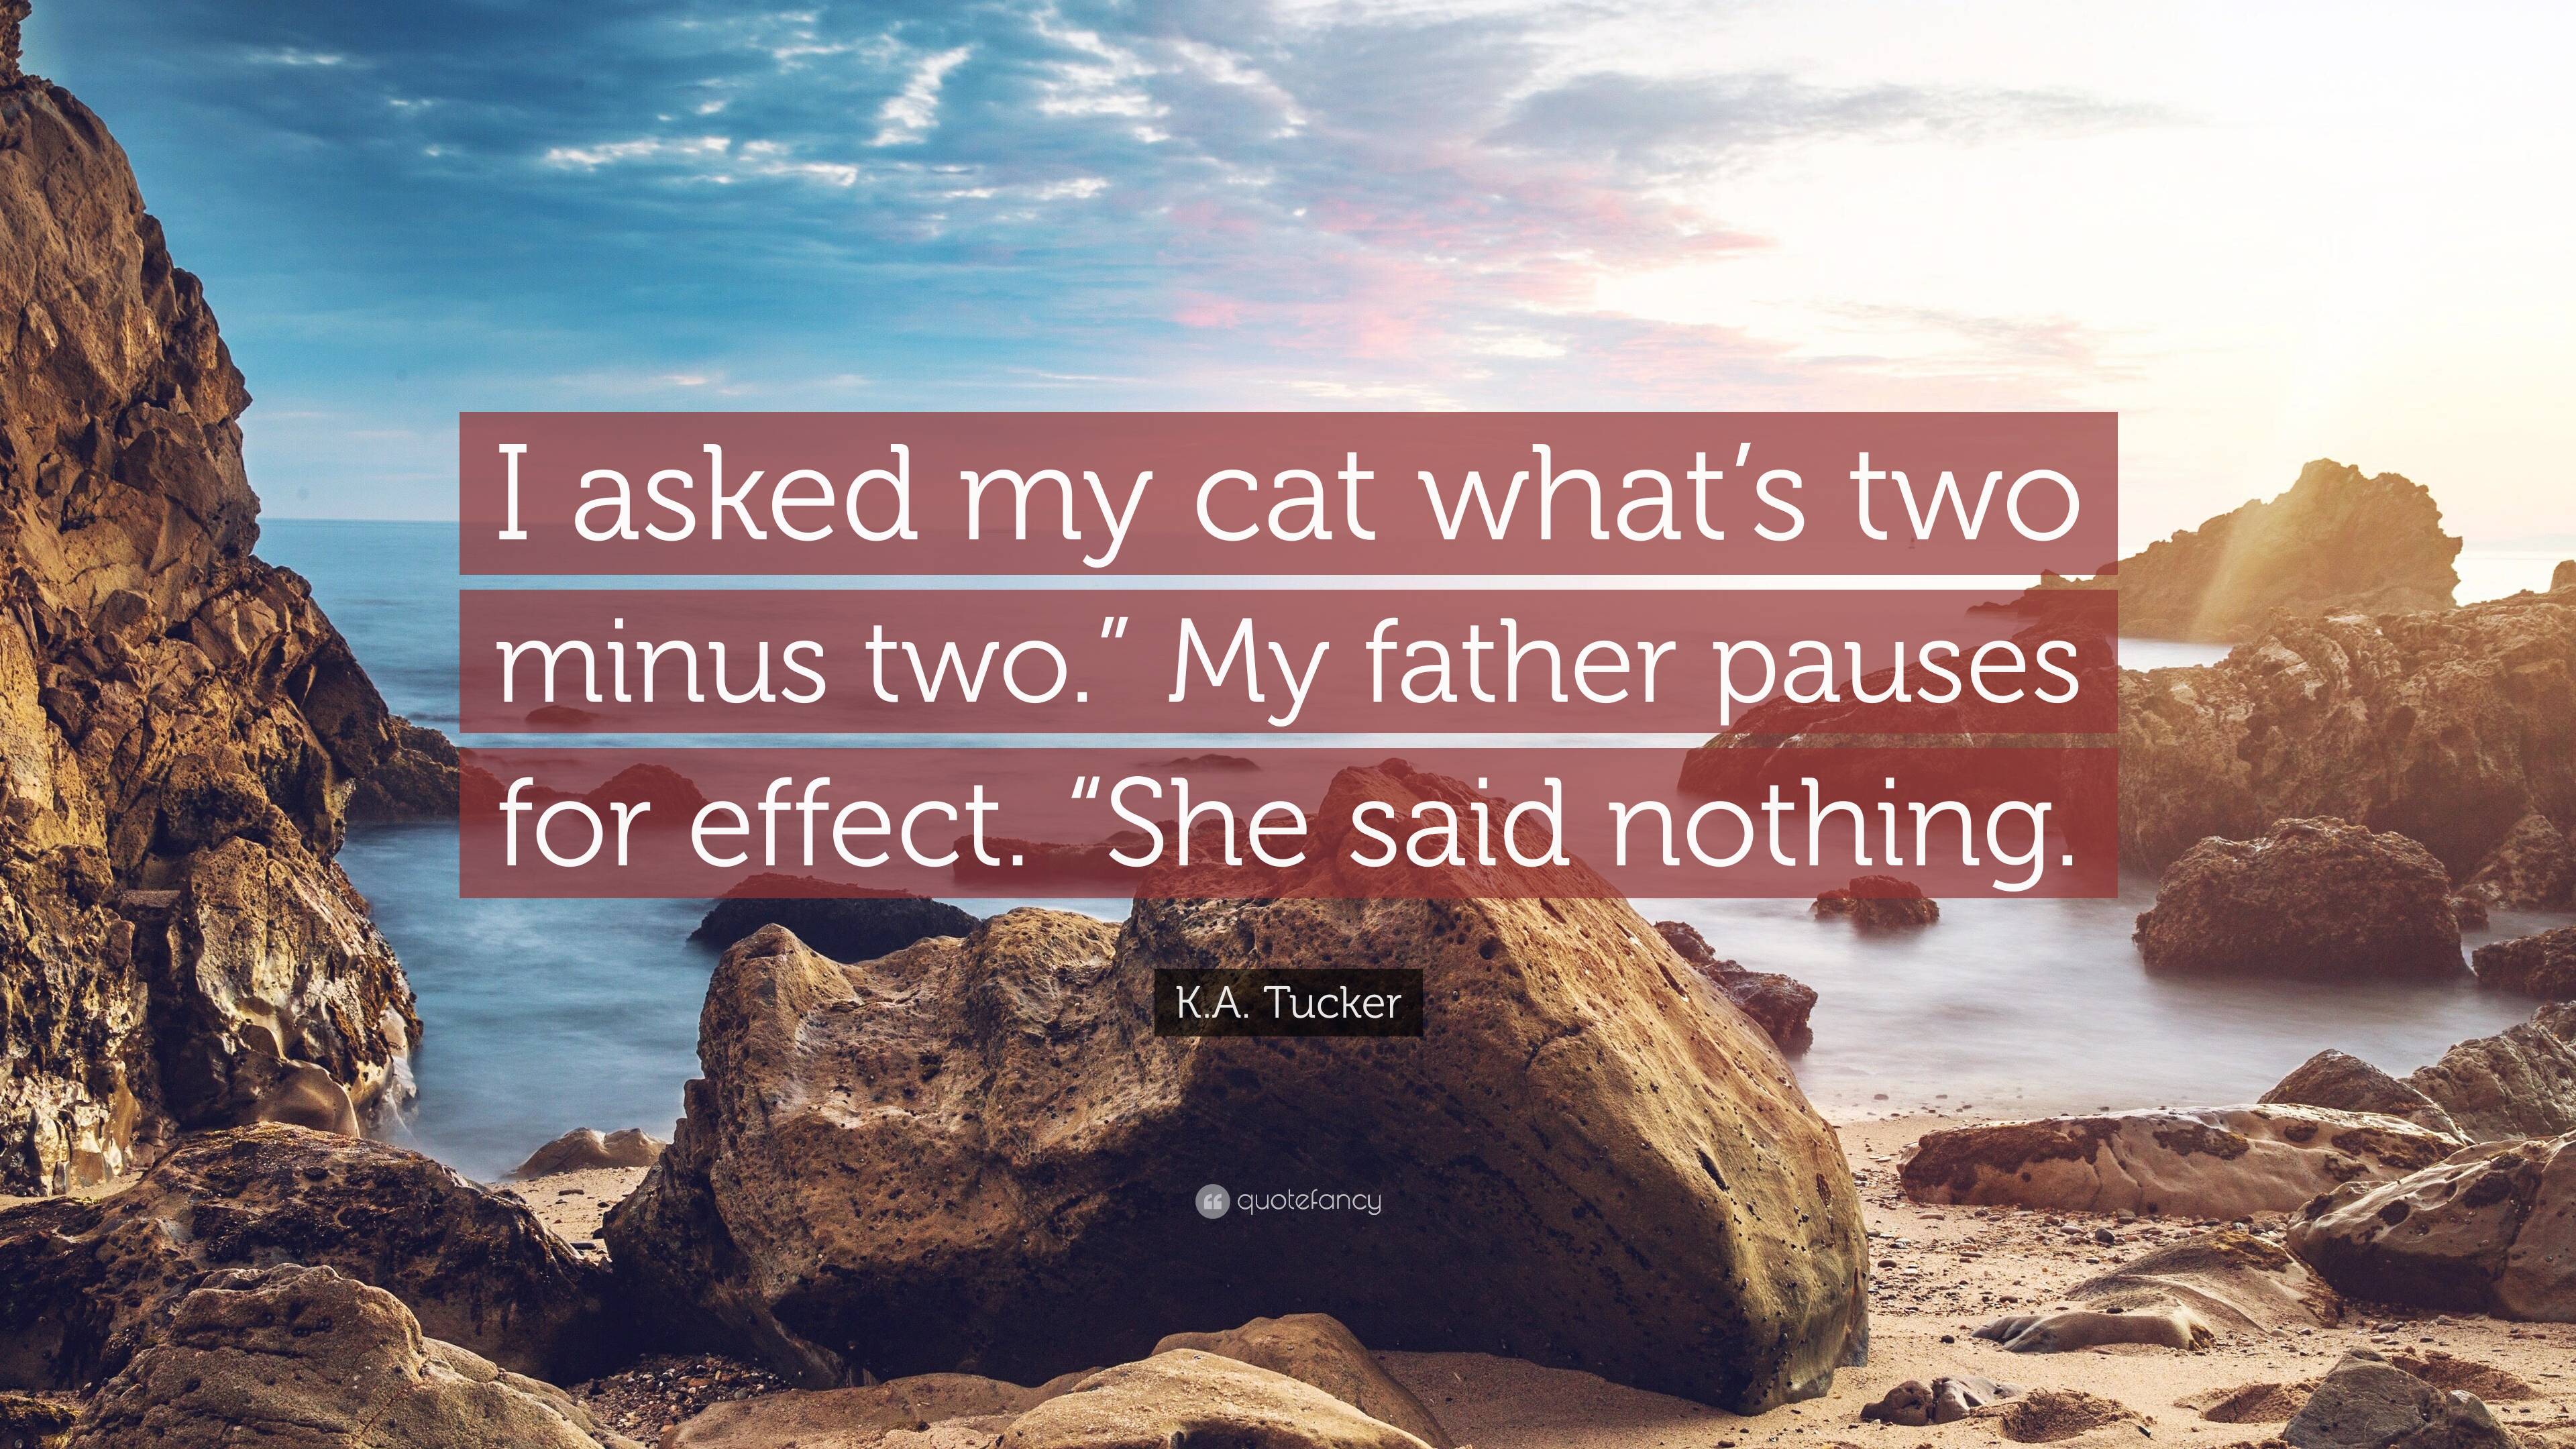 https://quotefancy.com/media/wallpaper/3840x2160/7275116-K-A-Tucker-Quote-I-asked-my-cat-what-s-two-minus-two-My-father.jpg